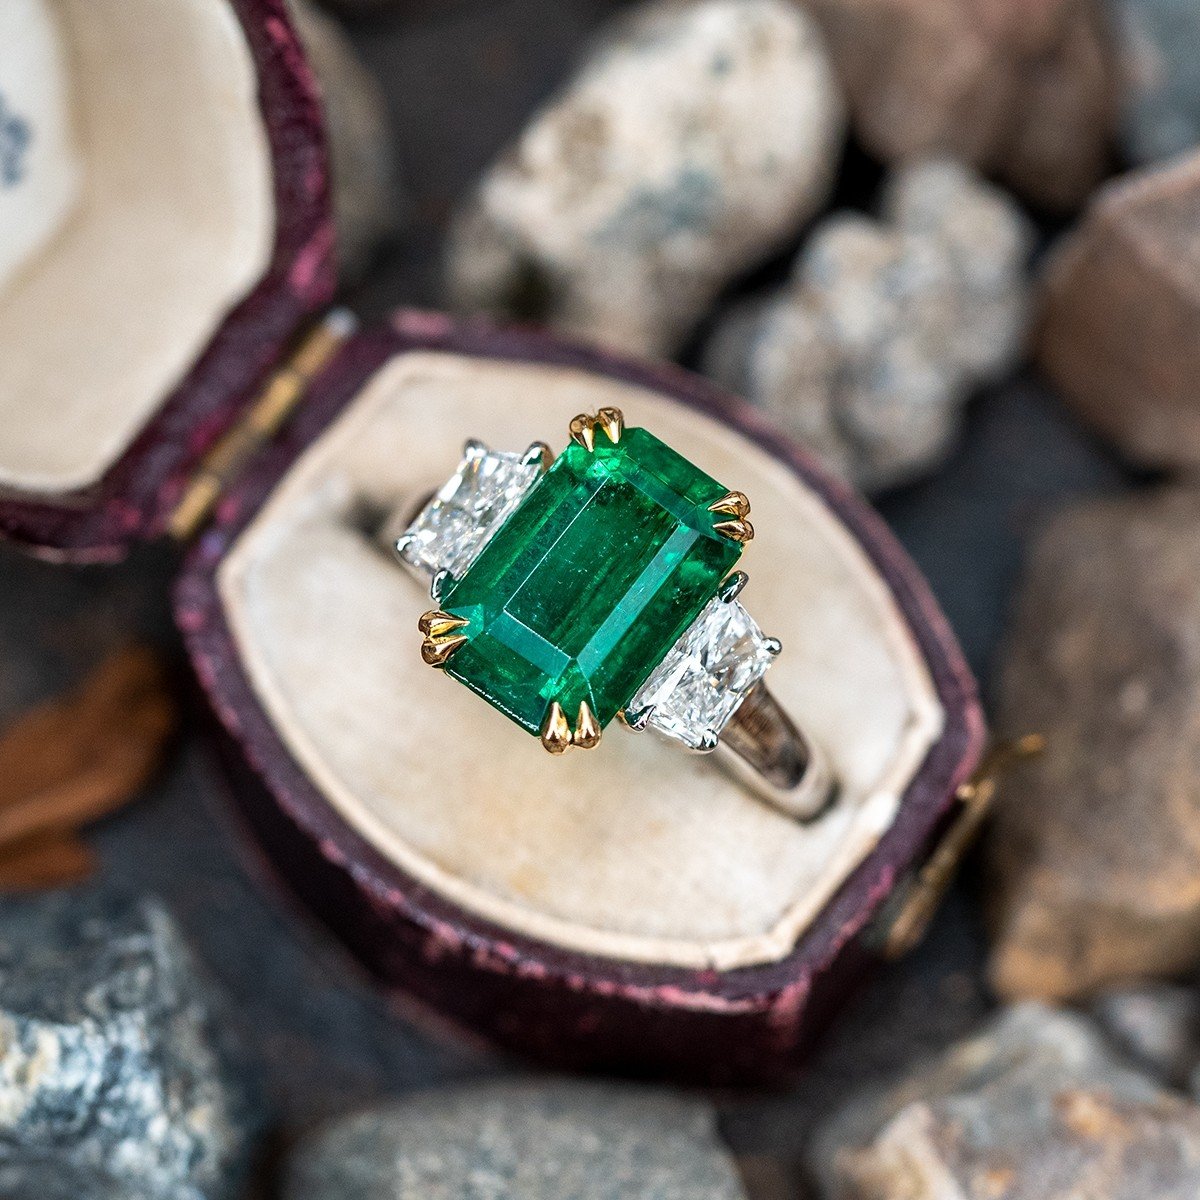 How Much Does an Emerald Ring Cost?